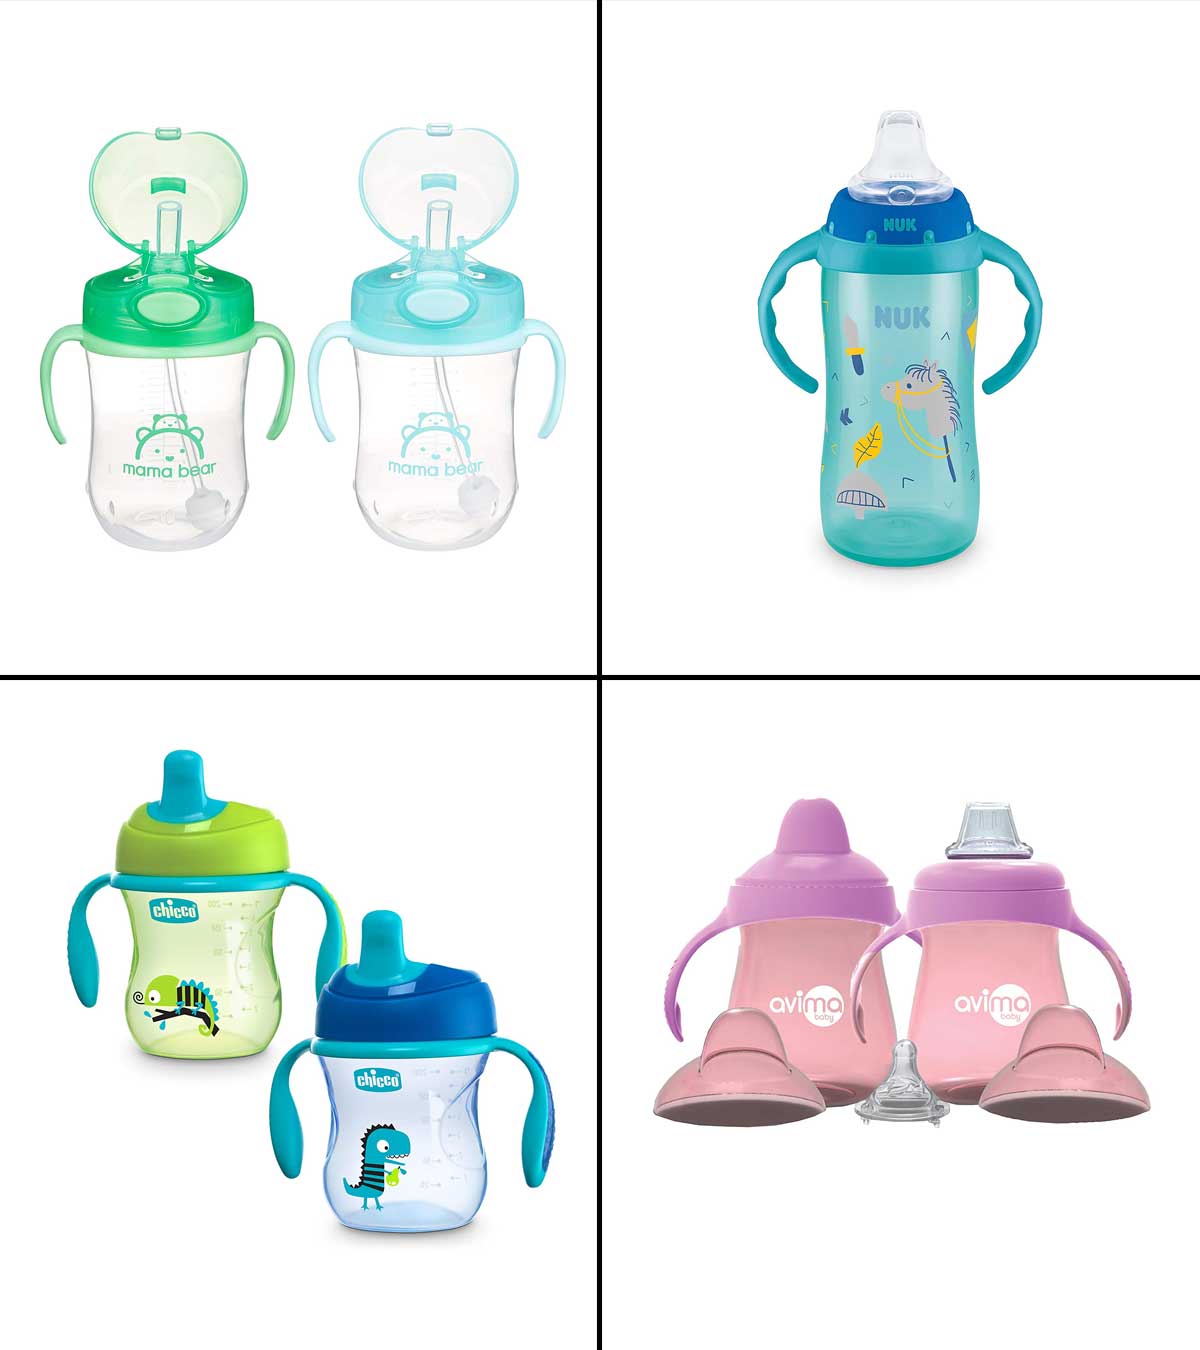 When babies can use sippy cups, and how to transition from bottle to cup